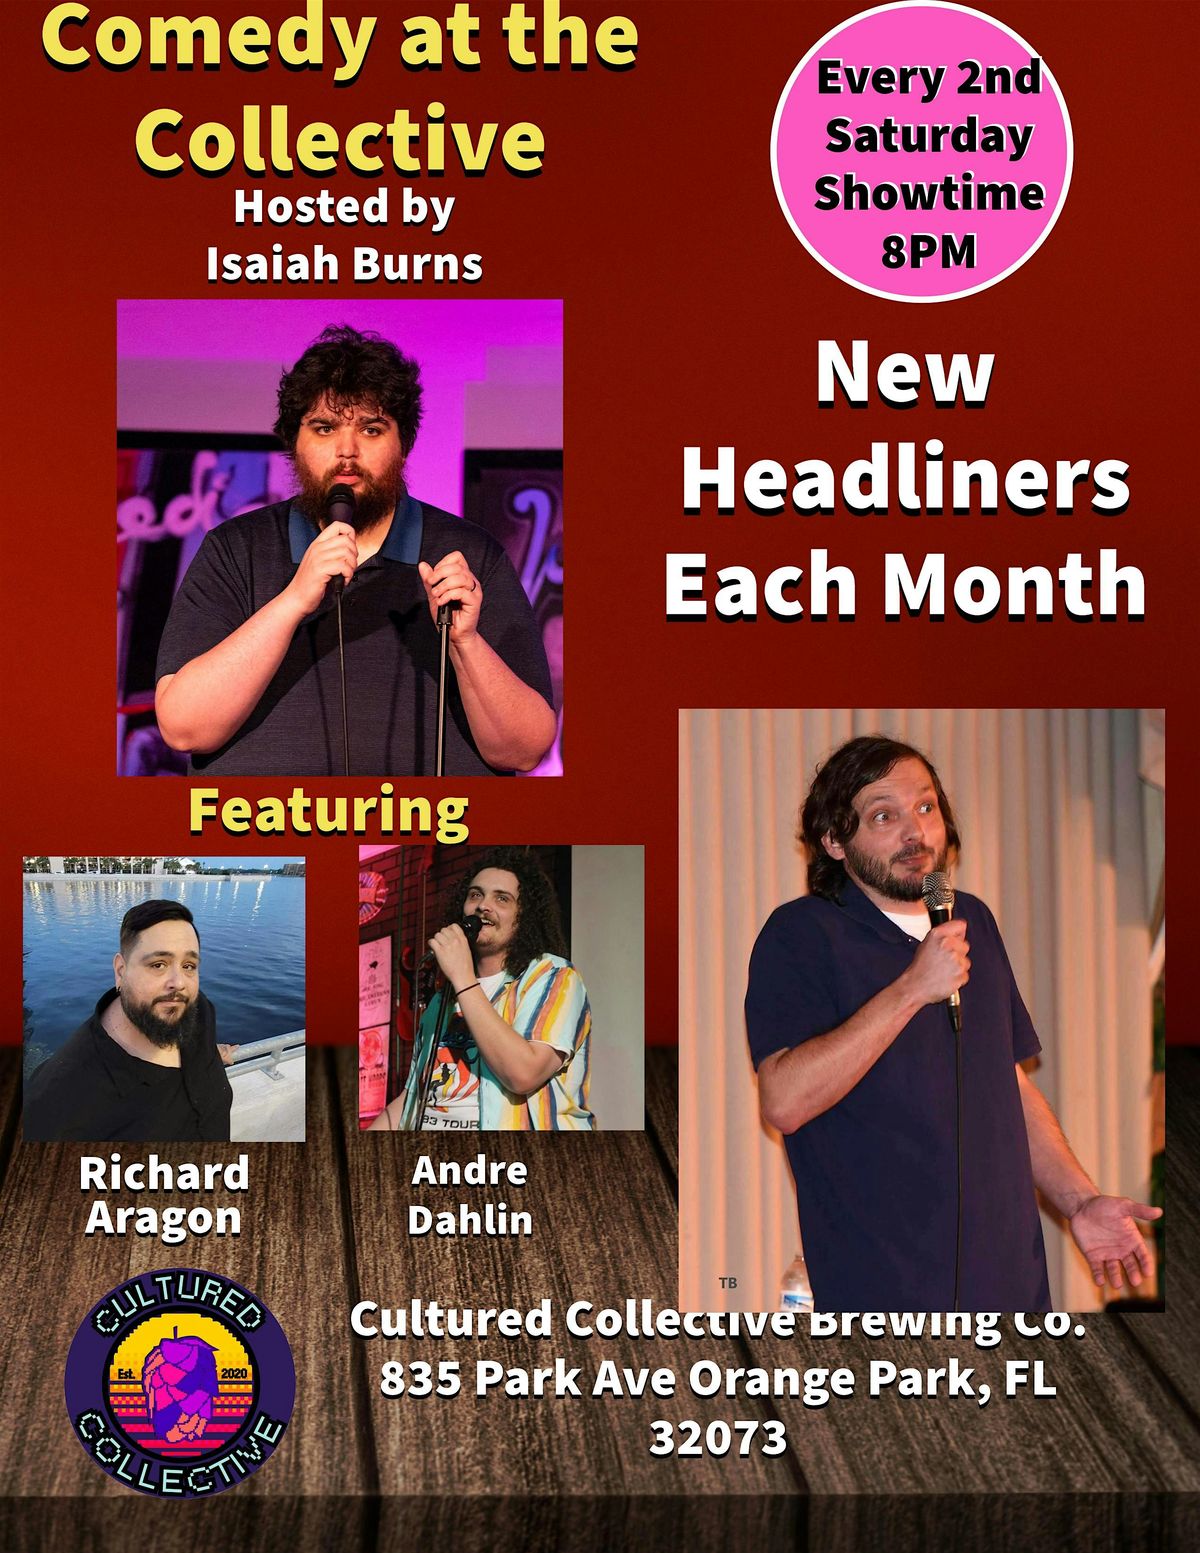 Comedy At the Collective